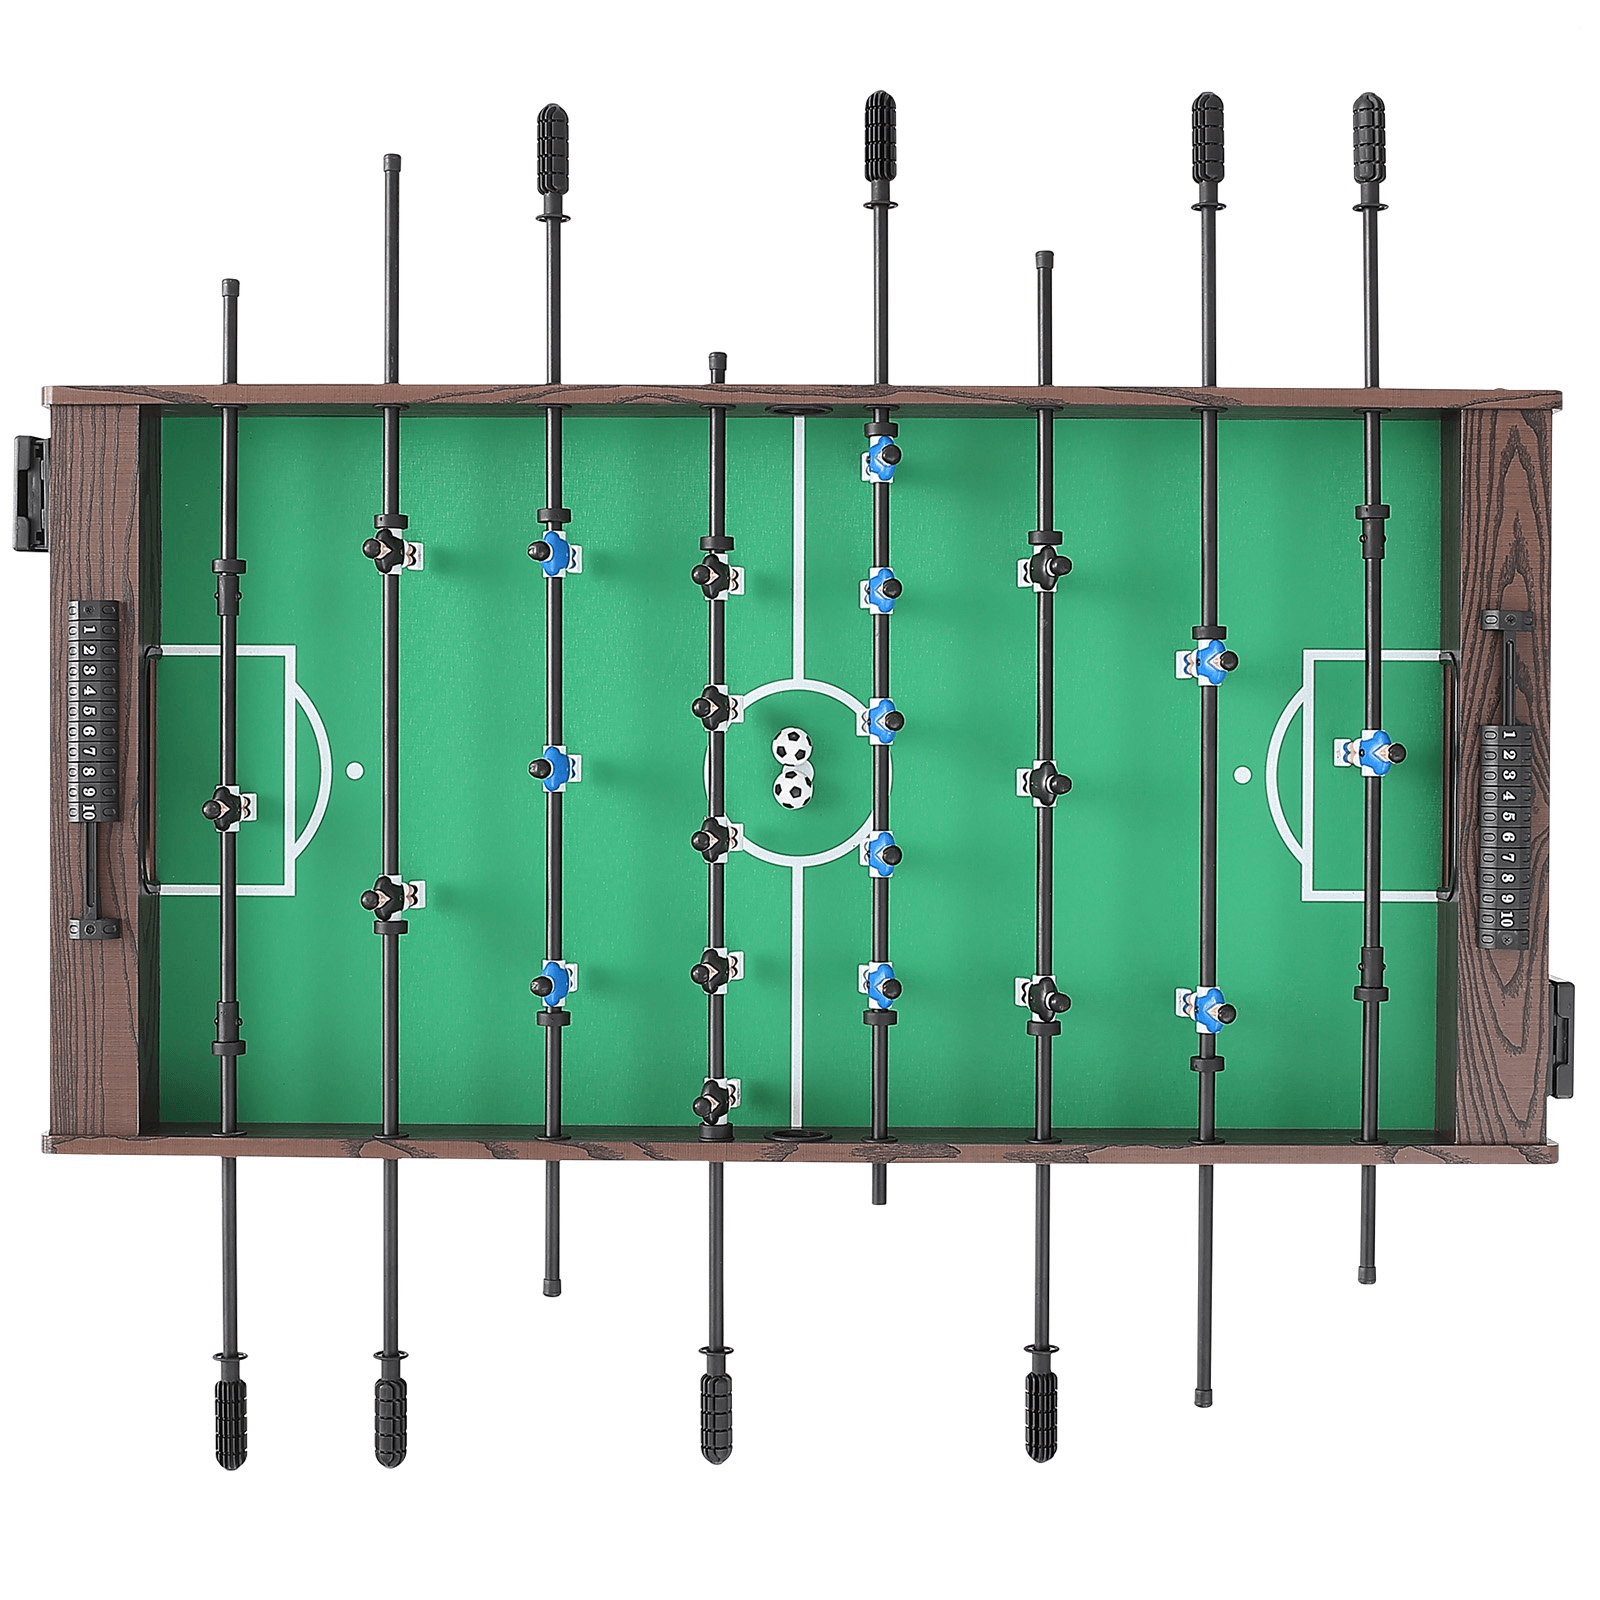 VEVOR Foosball Table, 48 inch Standard Size Foosball Table, Indoor Full Size Foosball Table for Home, Family, and Game Room, Soccer with Foosball Table Set, Includes 2 Balls and 2 Cup Holders - Loomini